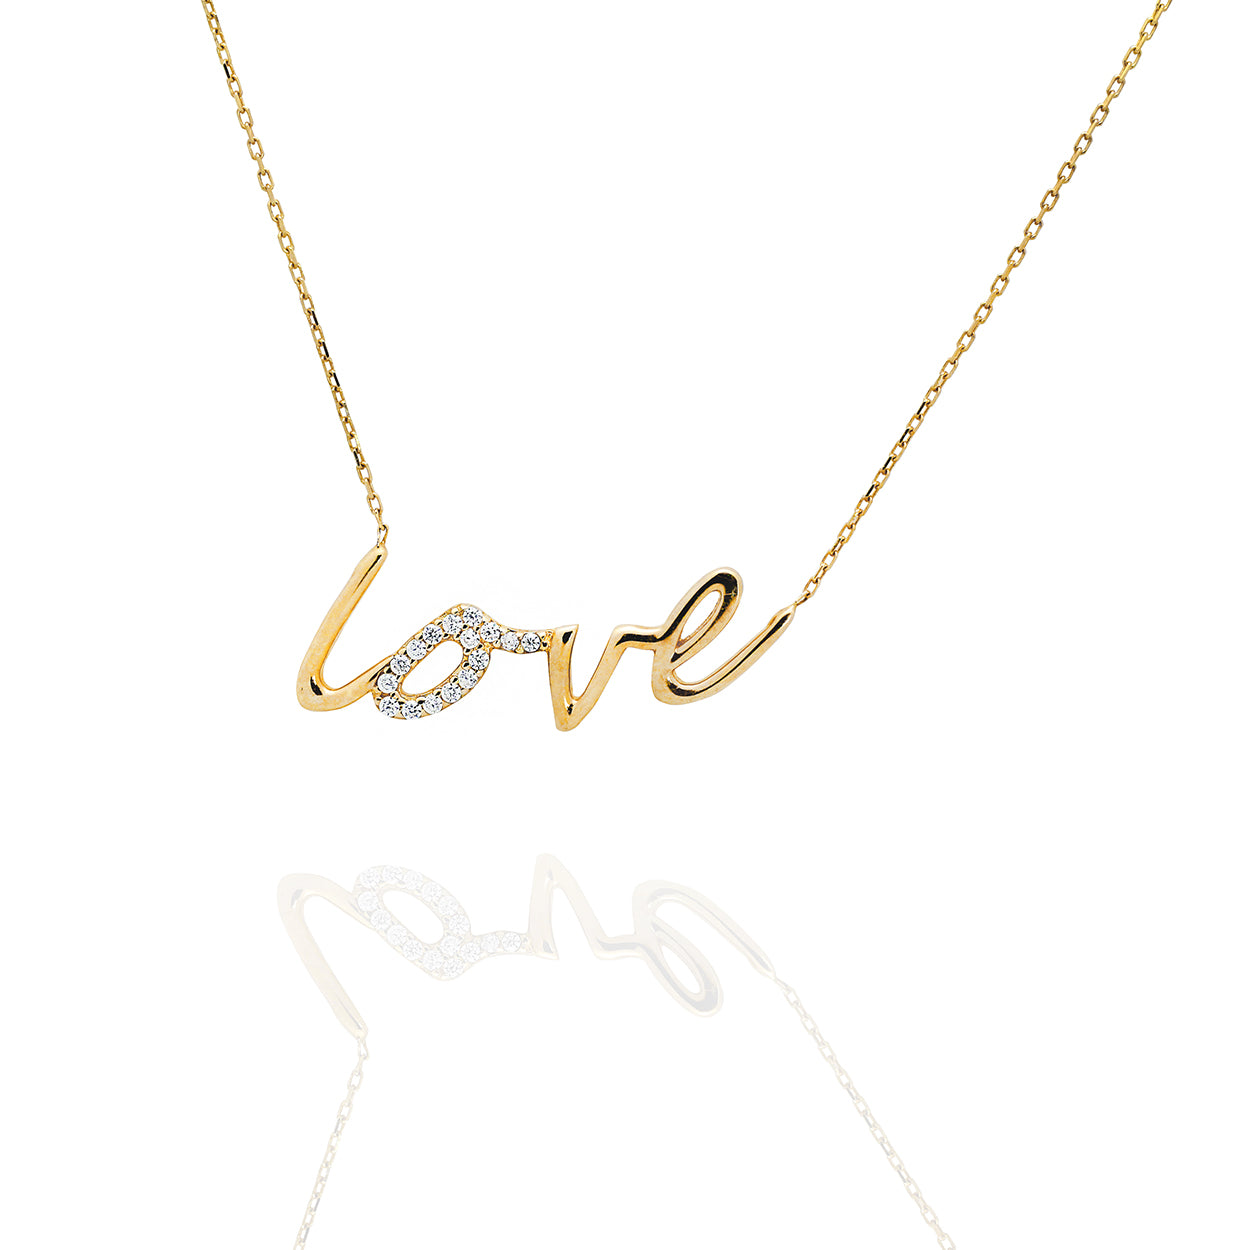 10kt Yellow Gold Love Necklace set with Cubic Zirconia and attached to a cable style chain